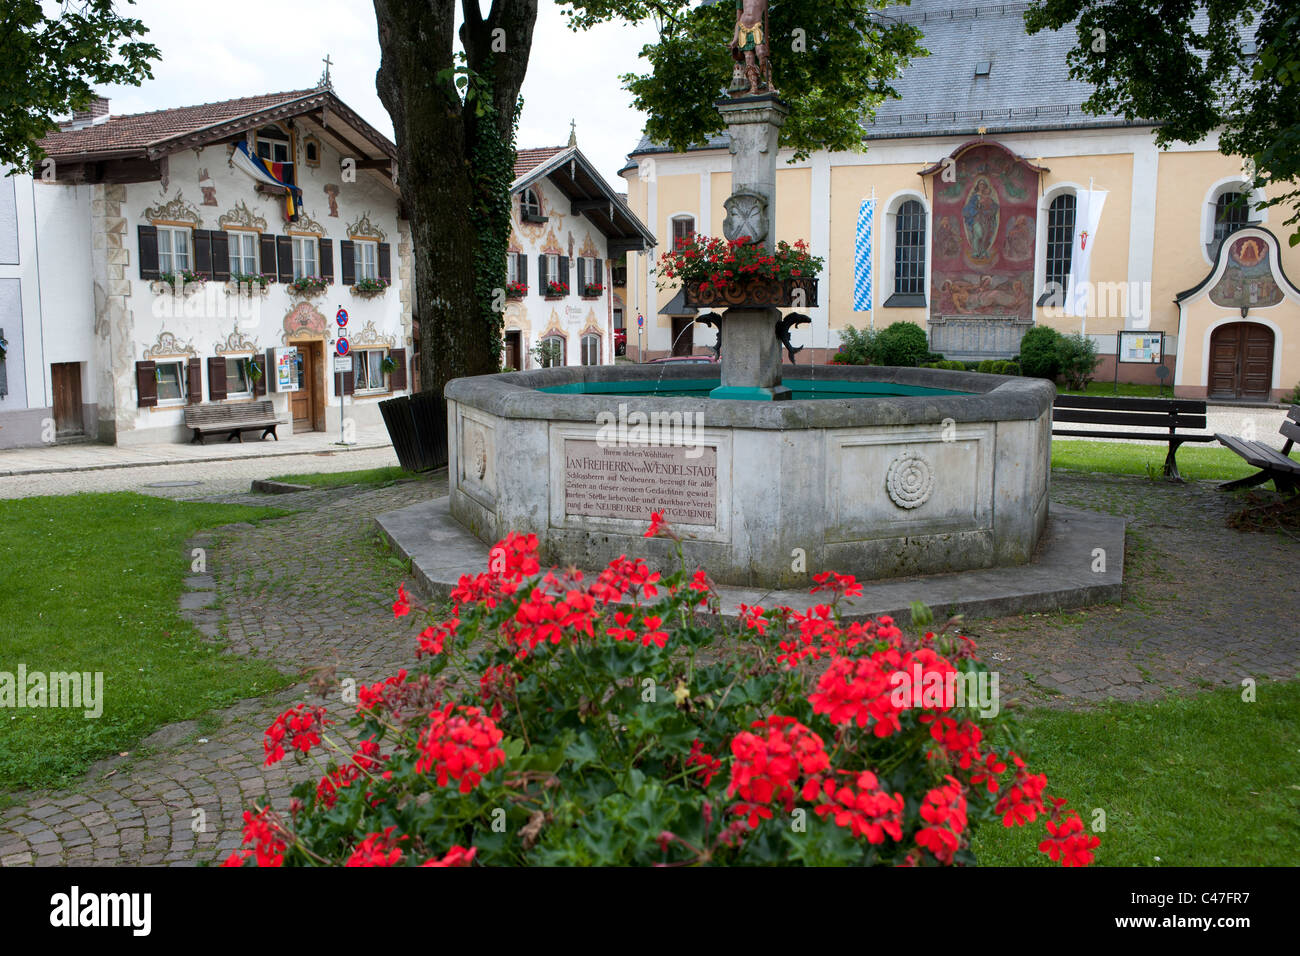 waterspout fountain on market place of city Neubeuern in Bavaria, Germany Stock Photo